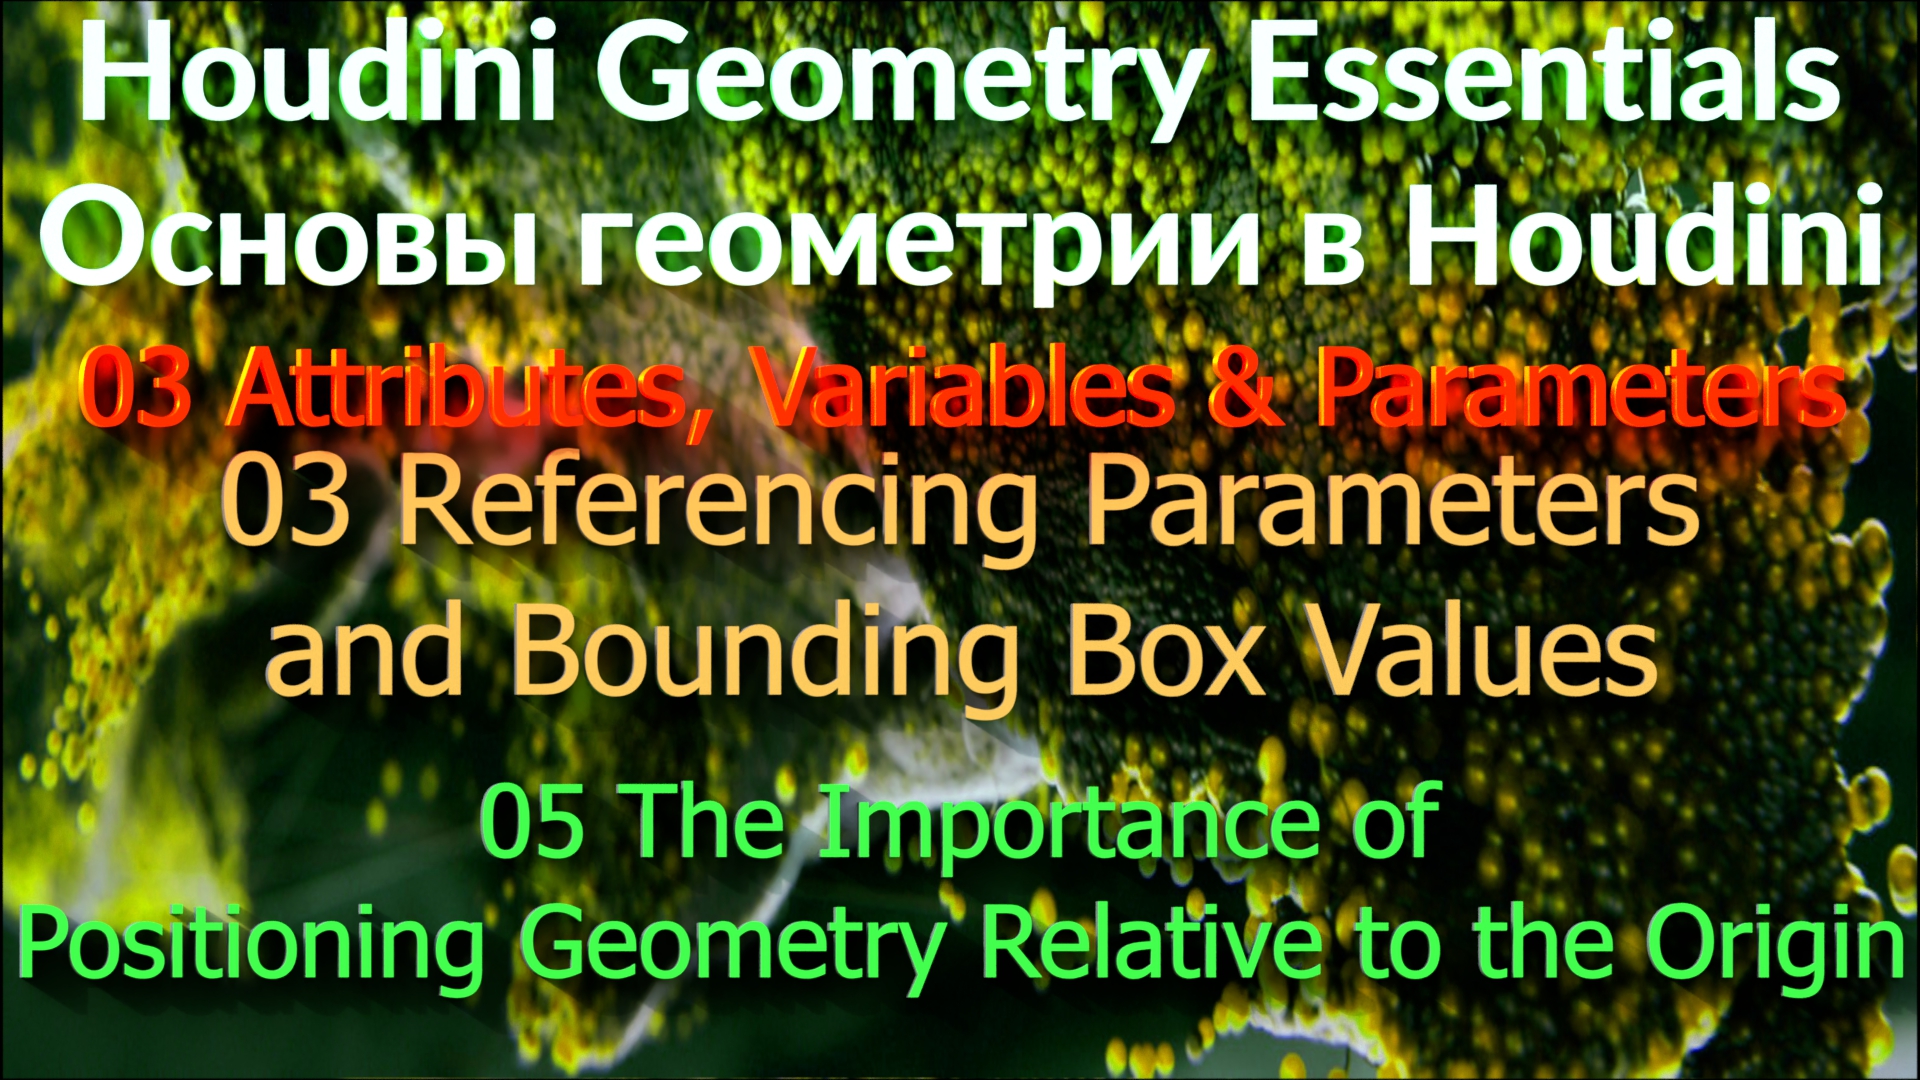 03_03_05 The Importance of Positioning Geometry Relative to the Origin